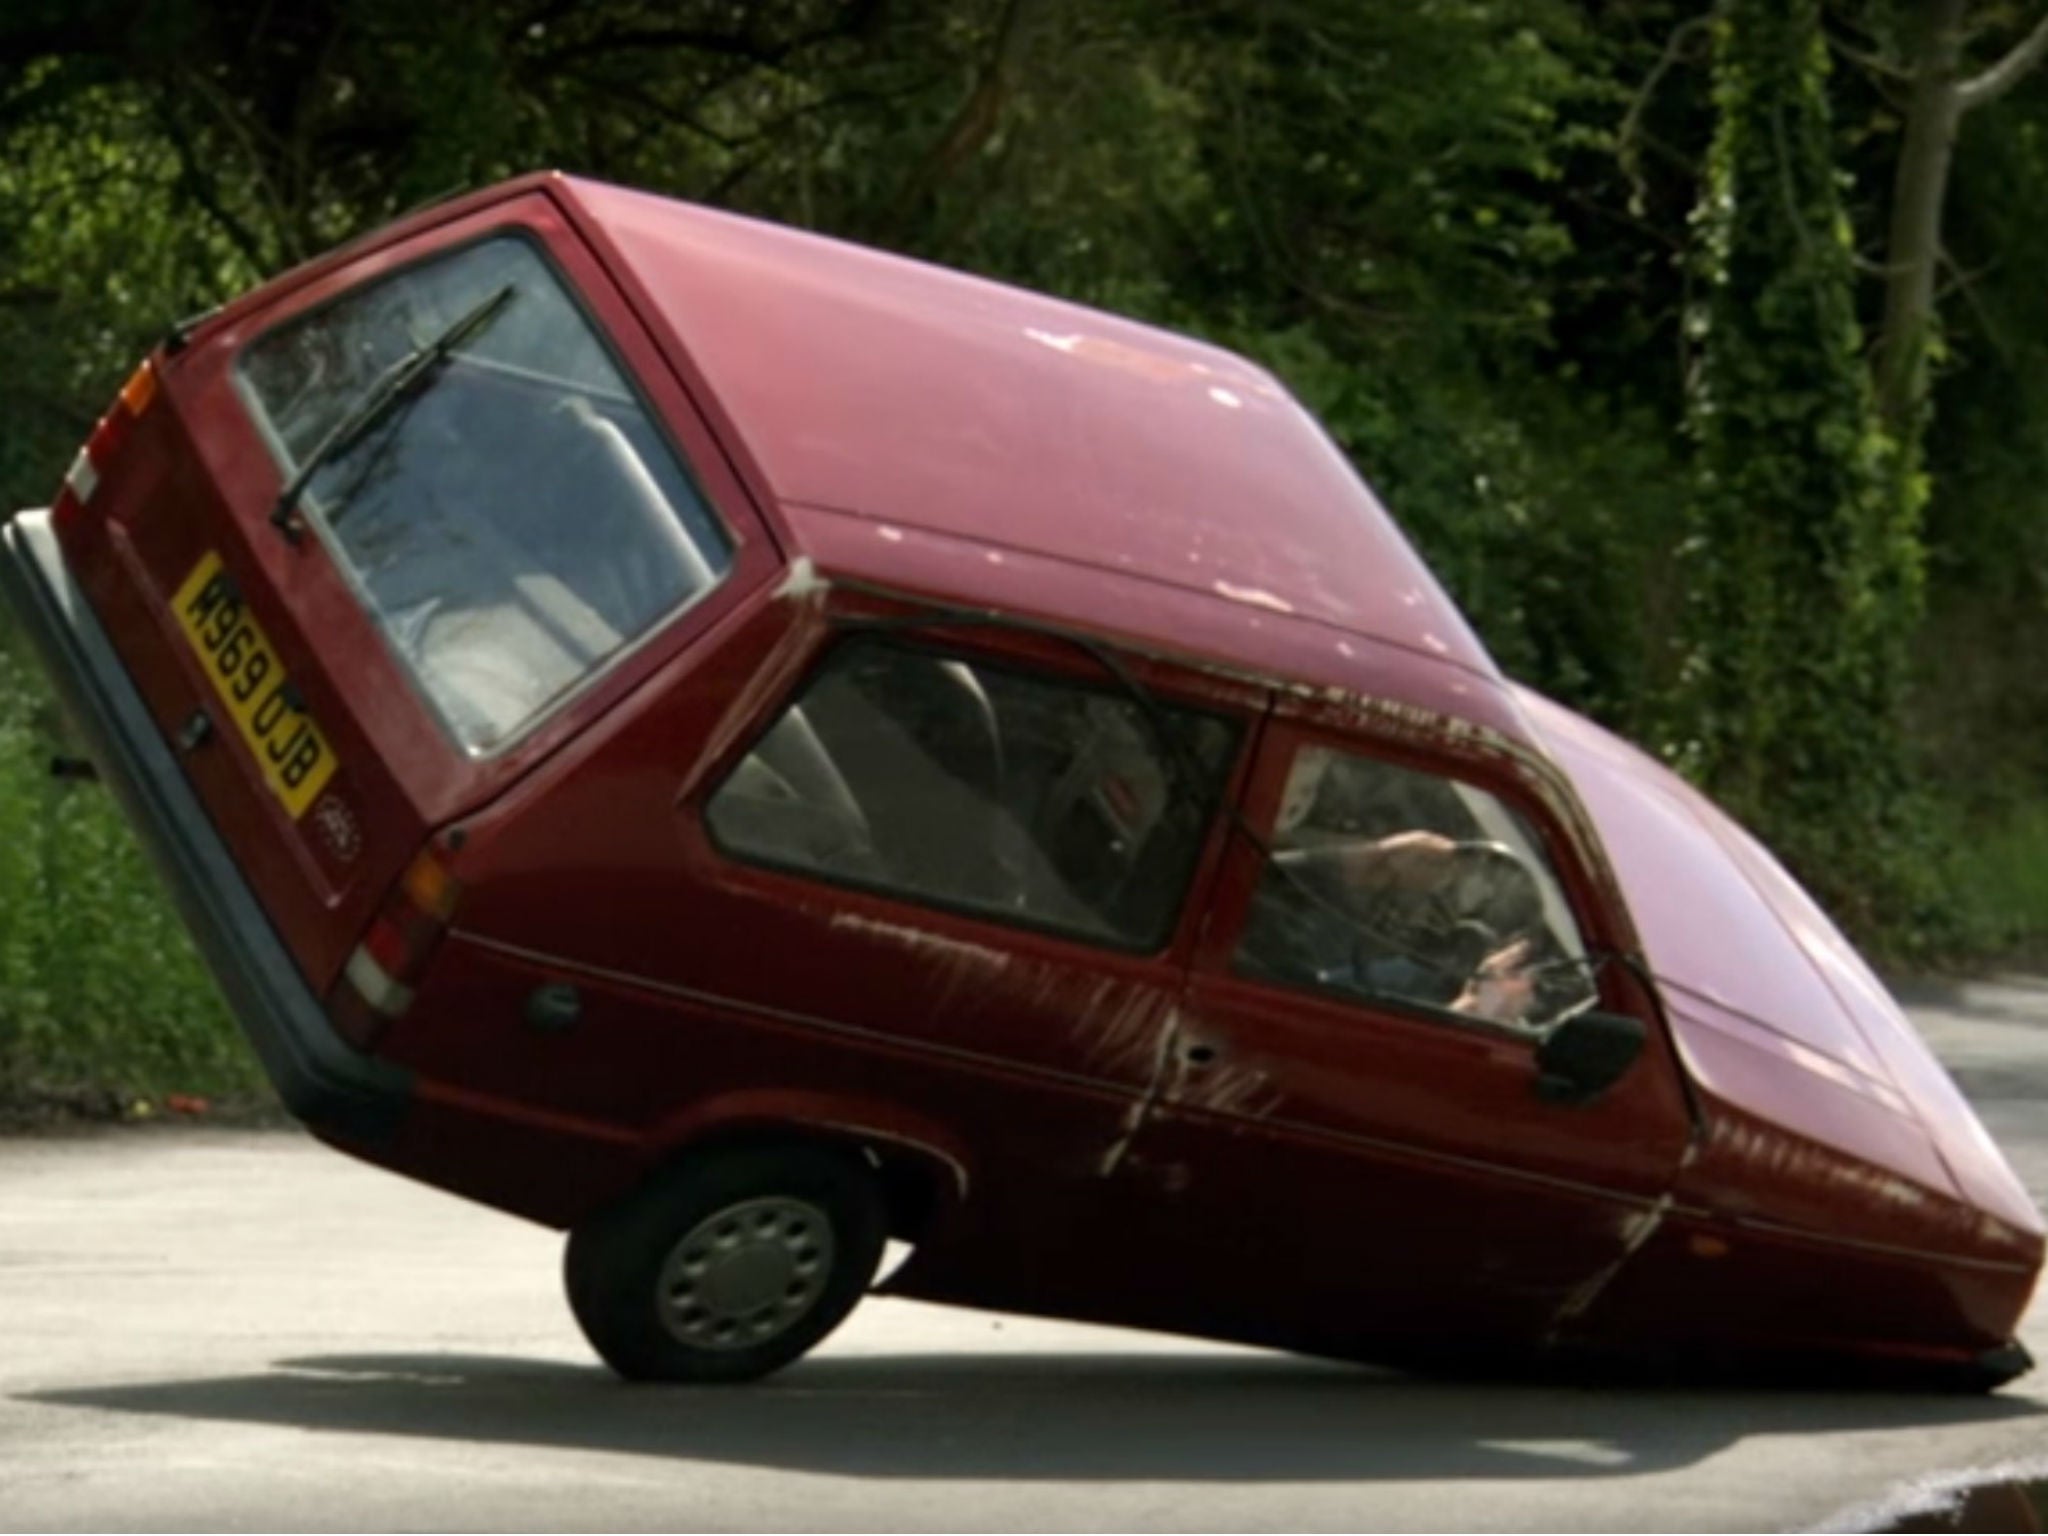 Jeremy Clarkson's Reliant Robin rolling clip wasn't as genuine as fans thought